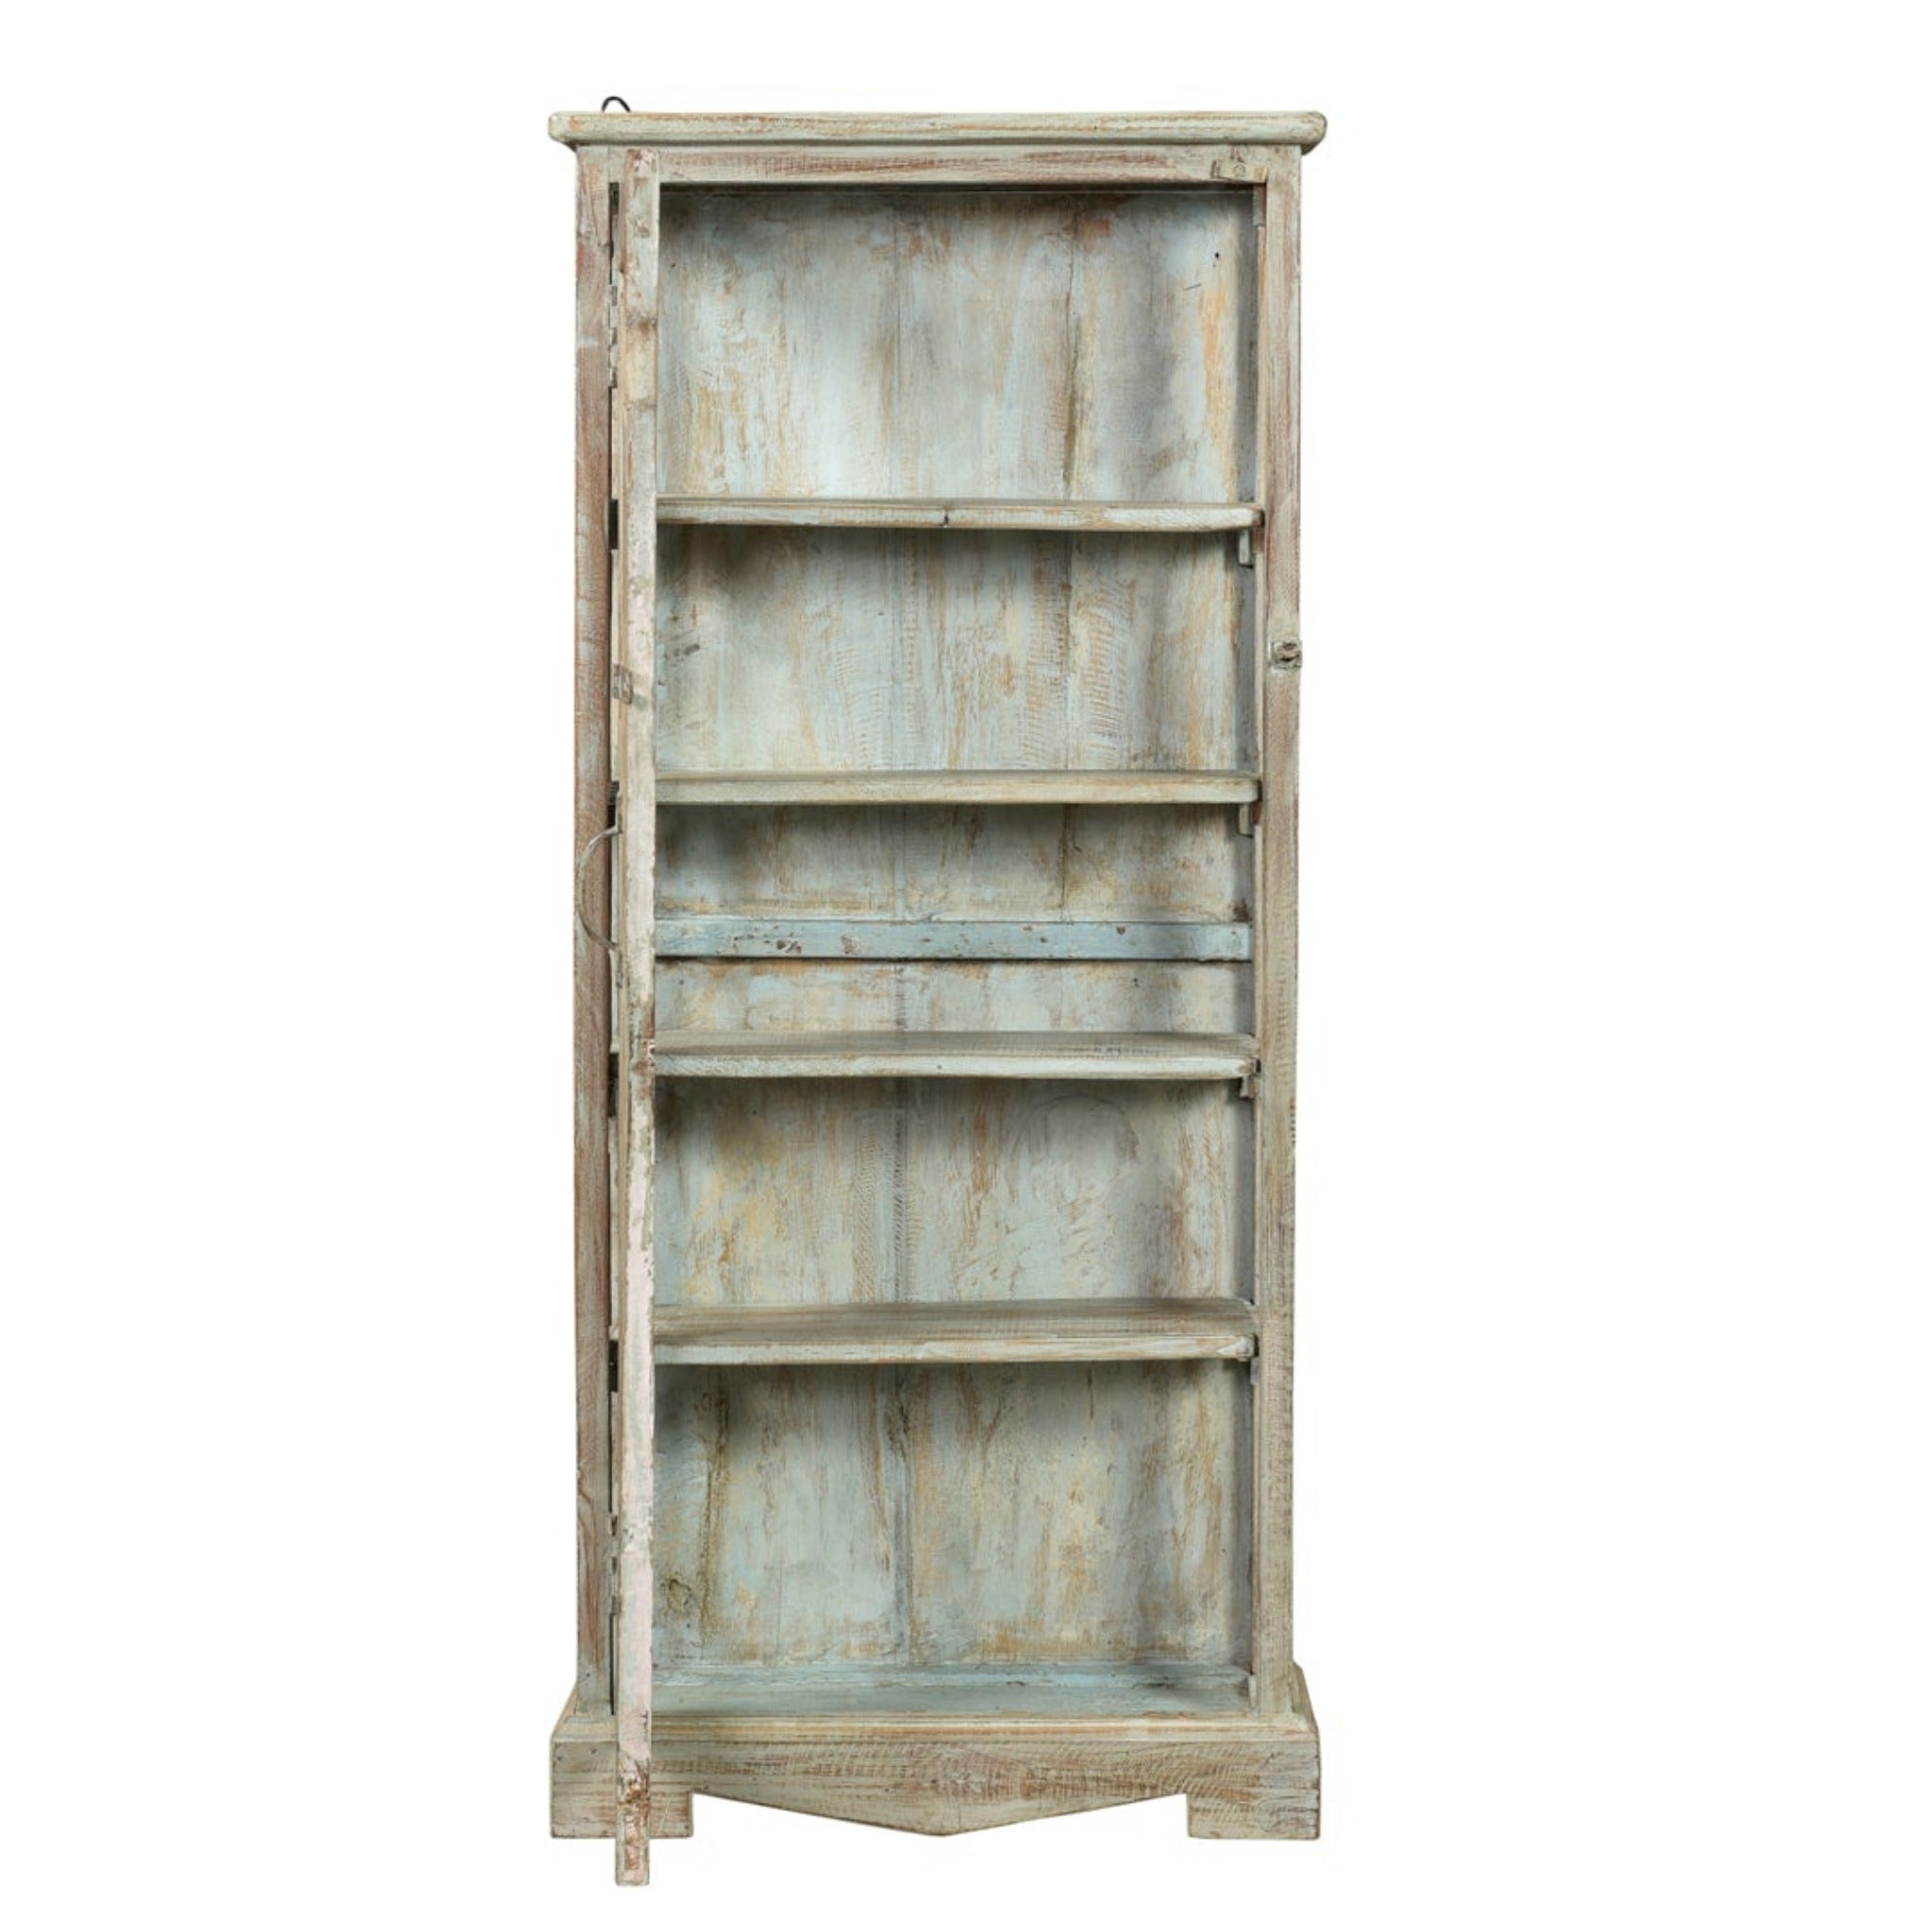 Tundra Wall Glass Cabinet with doors open